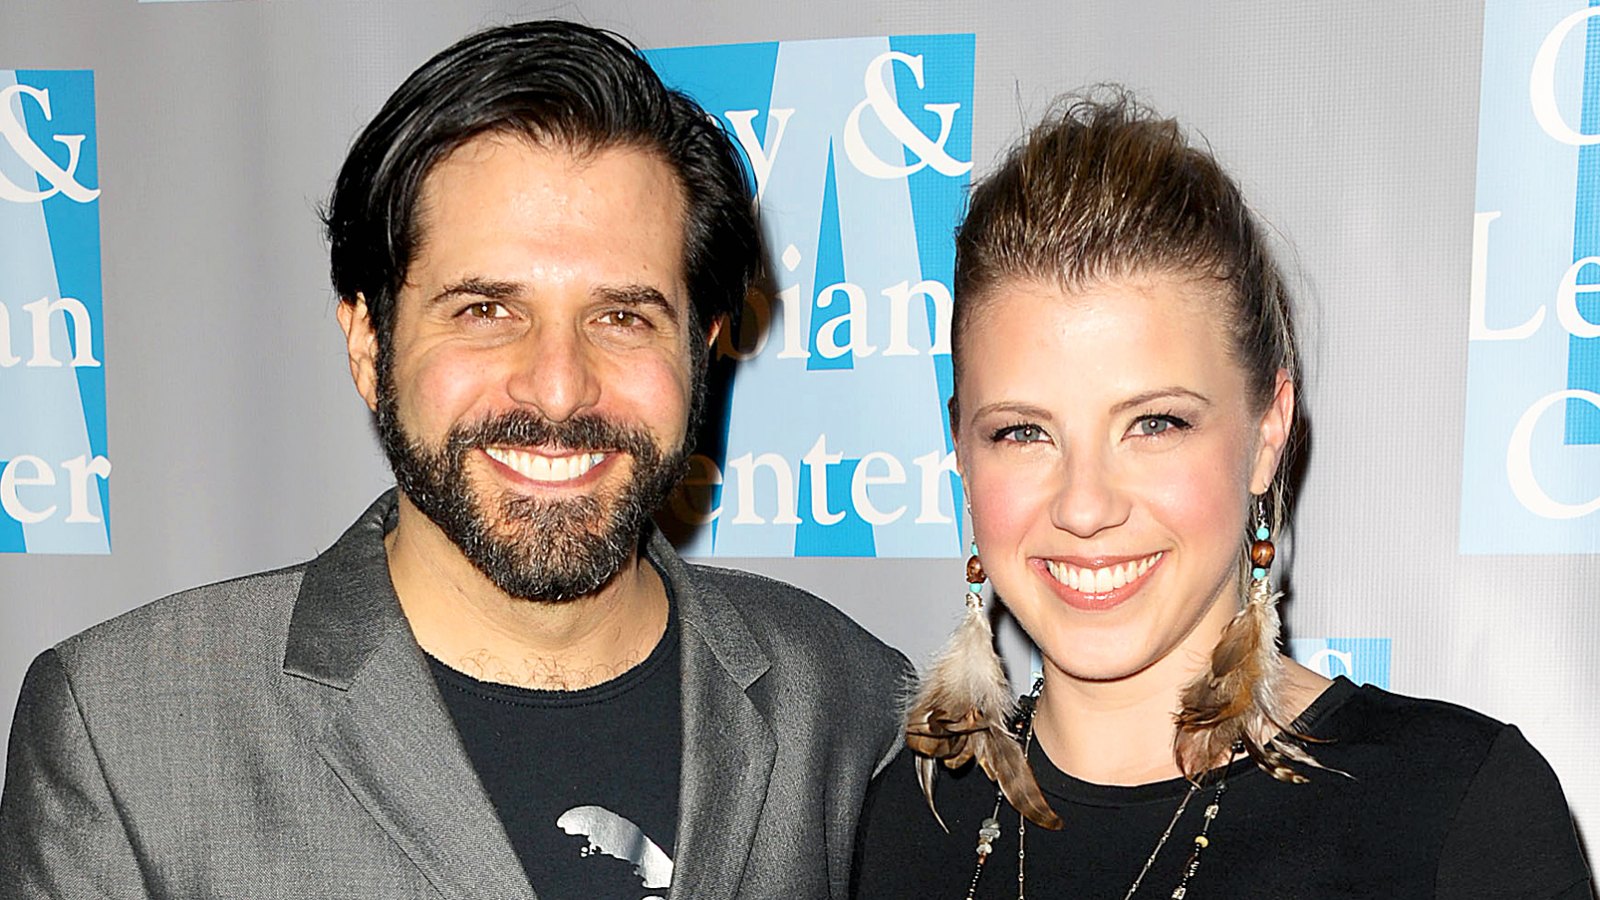 Jodie Sweetin and Morty Coyle attend L.A. Gay & Lesbian Center's 'An Evening With Women' at The Beverly Hilton hotel on April 16, 2011 in Beverly Hills, California.